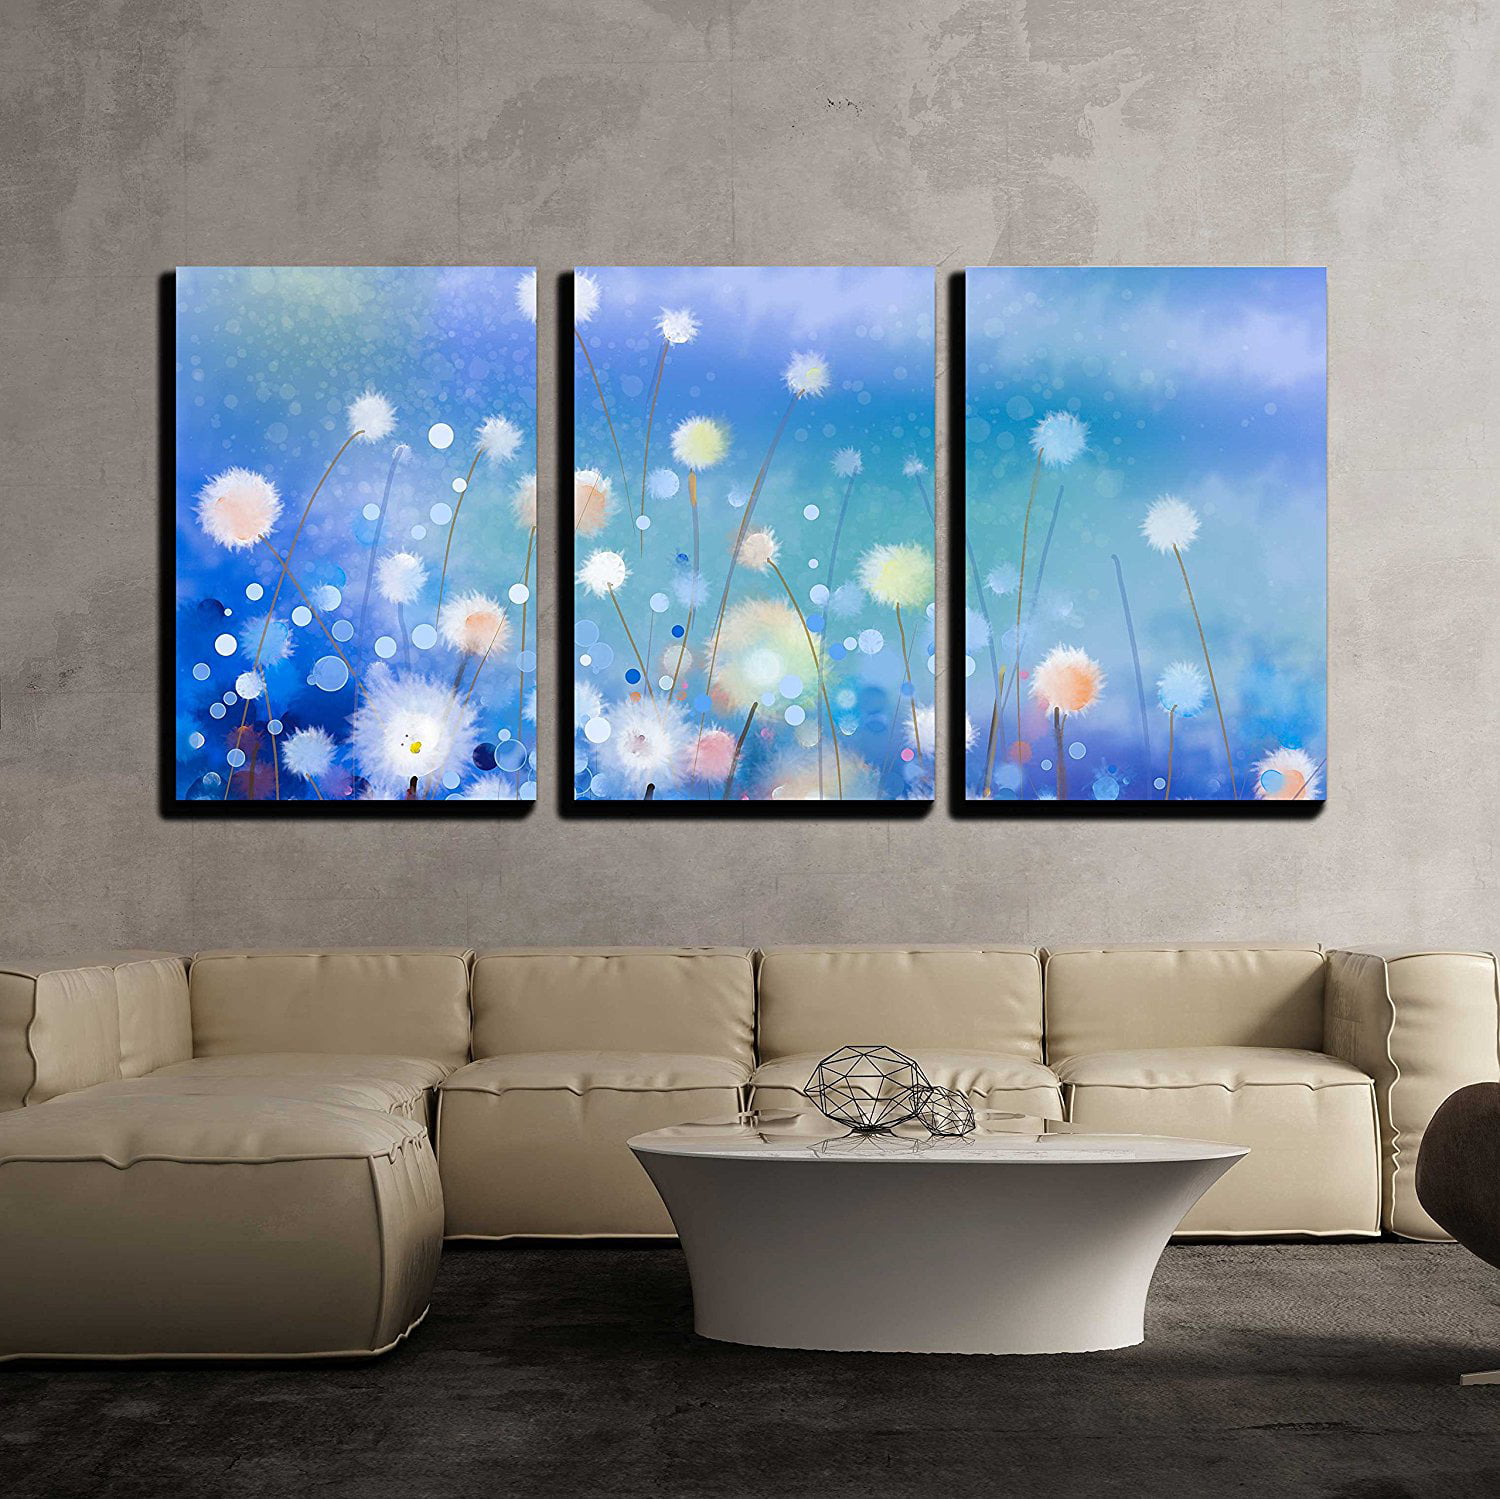 White Flower Abstract Art 3 PCS Canvas Printed Wall Poster Art Home Decor 